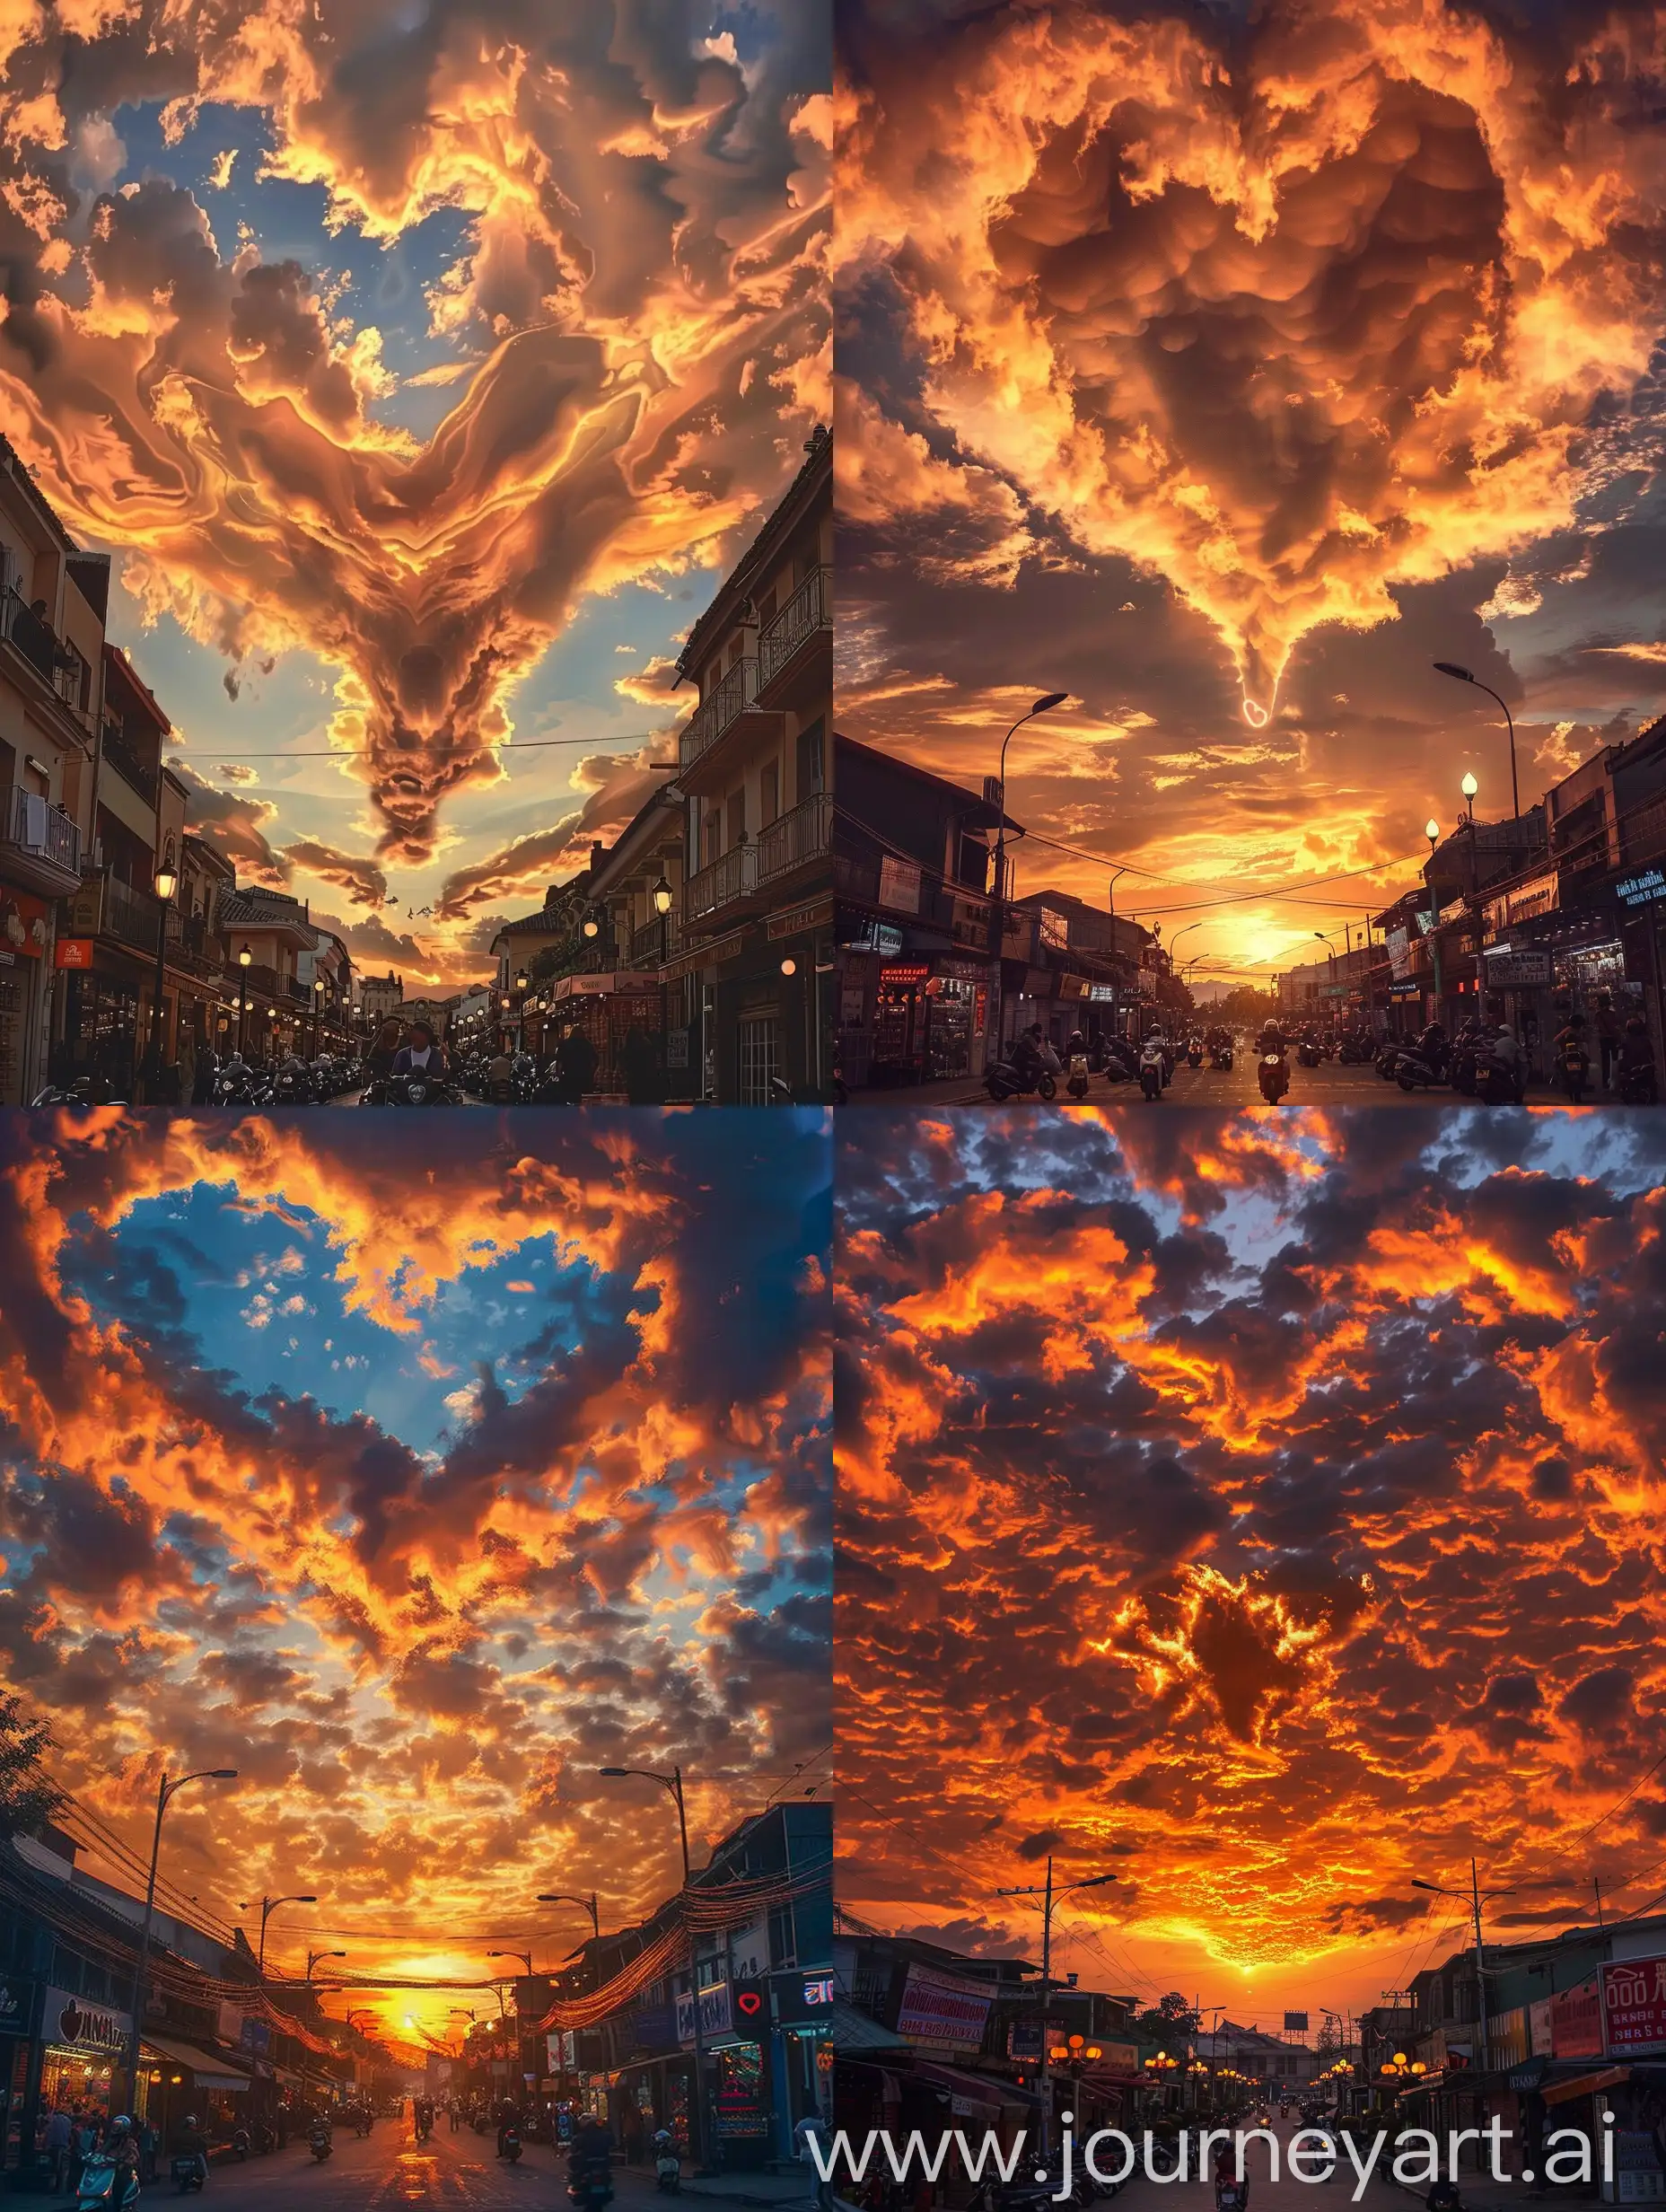  {"":"A dramatic and vivid sunset sky resembling flames amongst clouds with the central clouds forming a heart shape. The view of a town street lined with shops and street lamps below, with people and motorcyclists moving about.","size":"1024x1024"}
